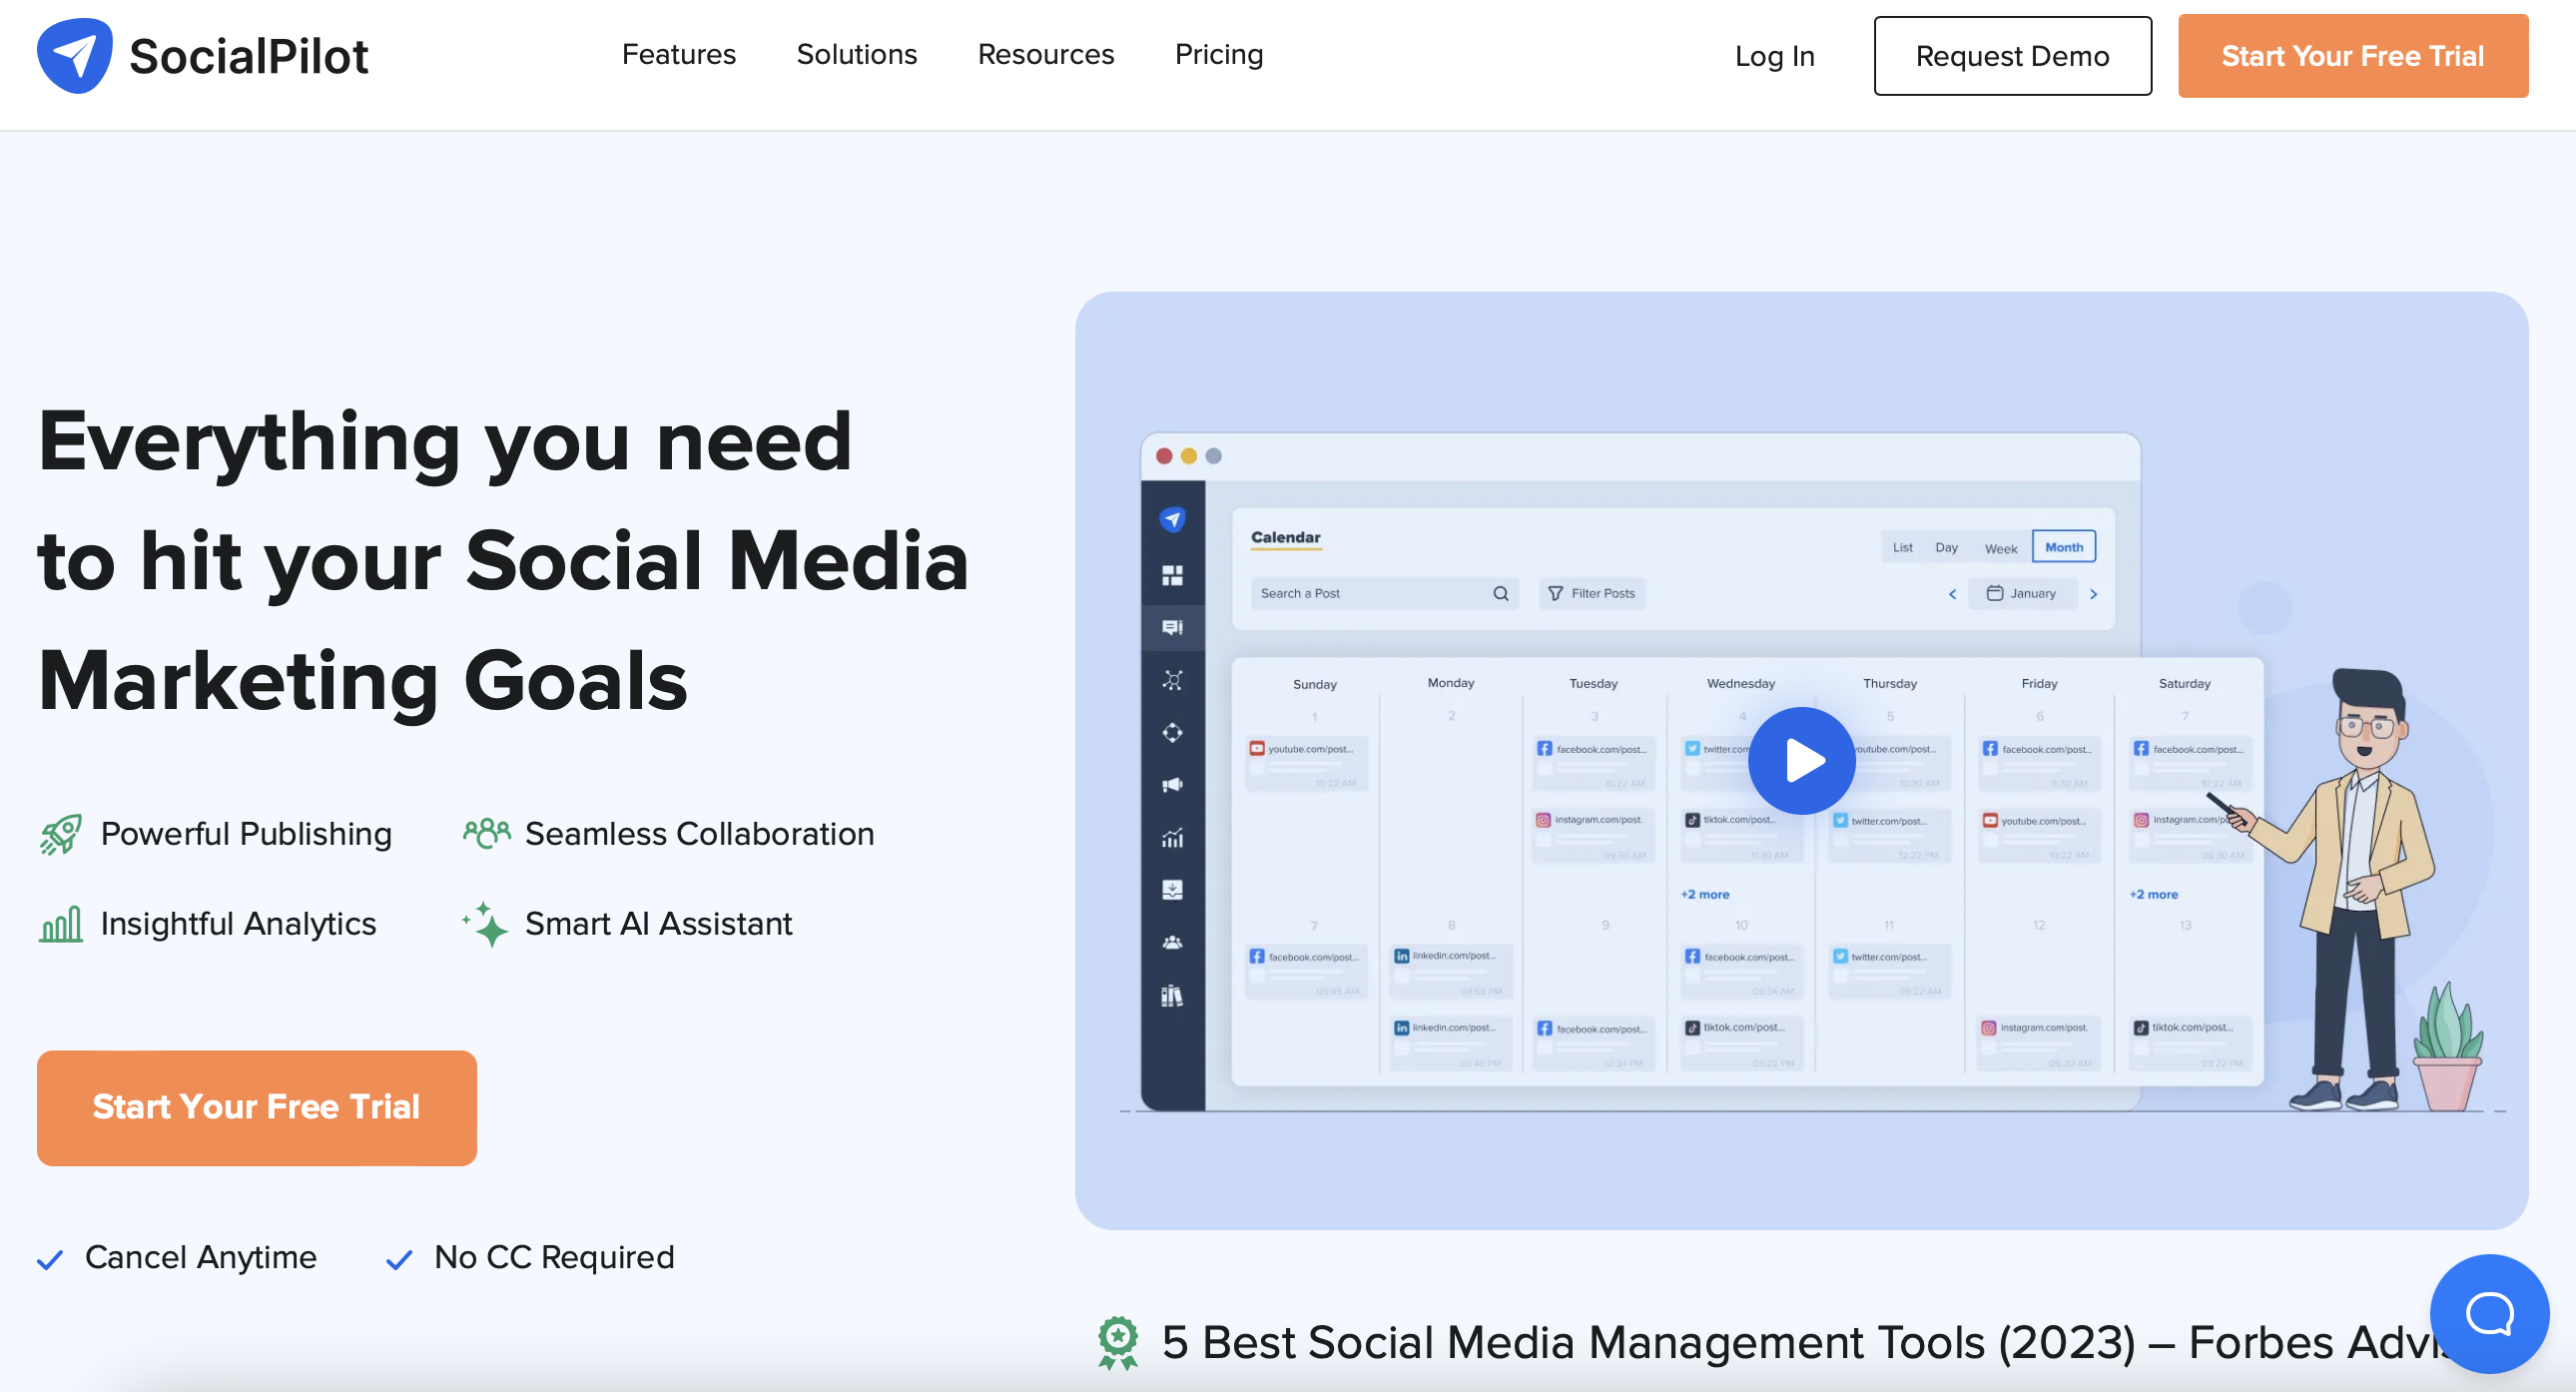 socialpilot homepage showing a cartoon character pointing to a graph next to text that reads "everything you need to hit your social media marketing goals"